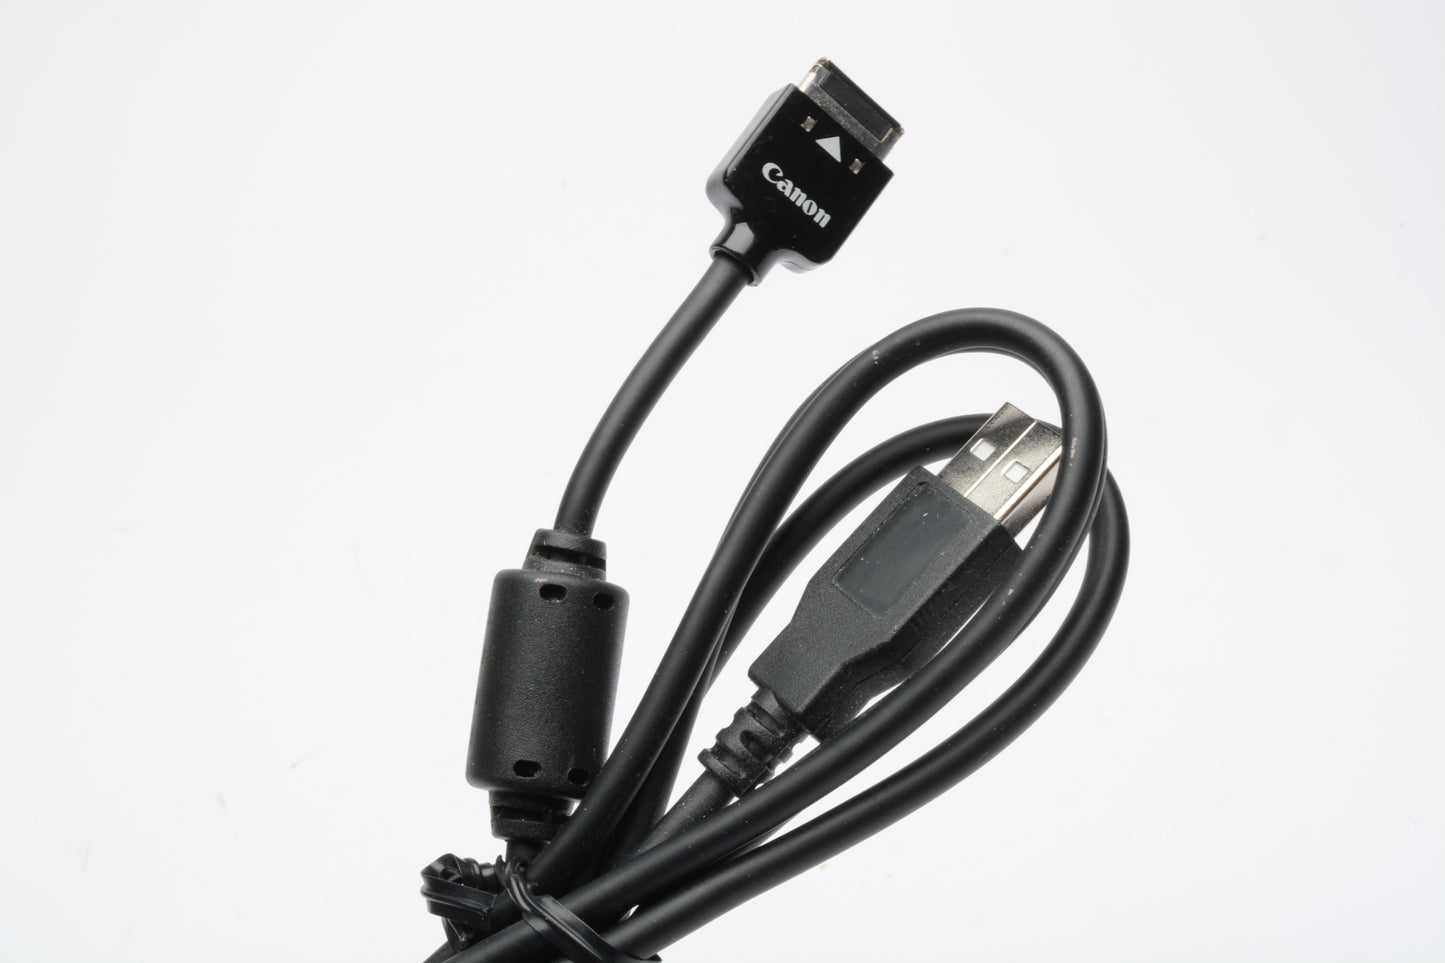 Canon HR5 Data Interface to USB cable (Genuine Canon) for Powershot S200 & others